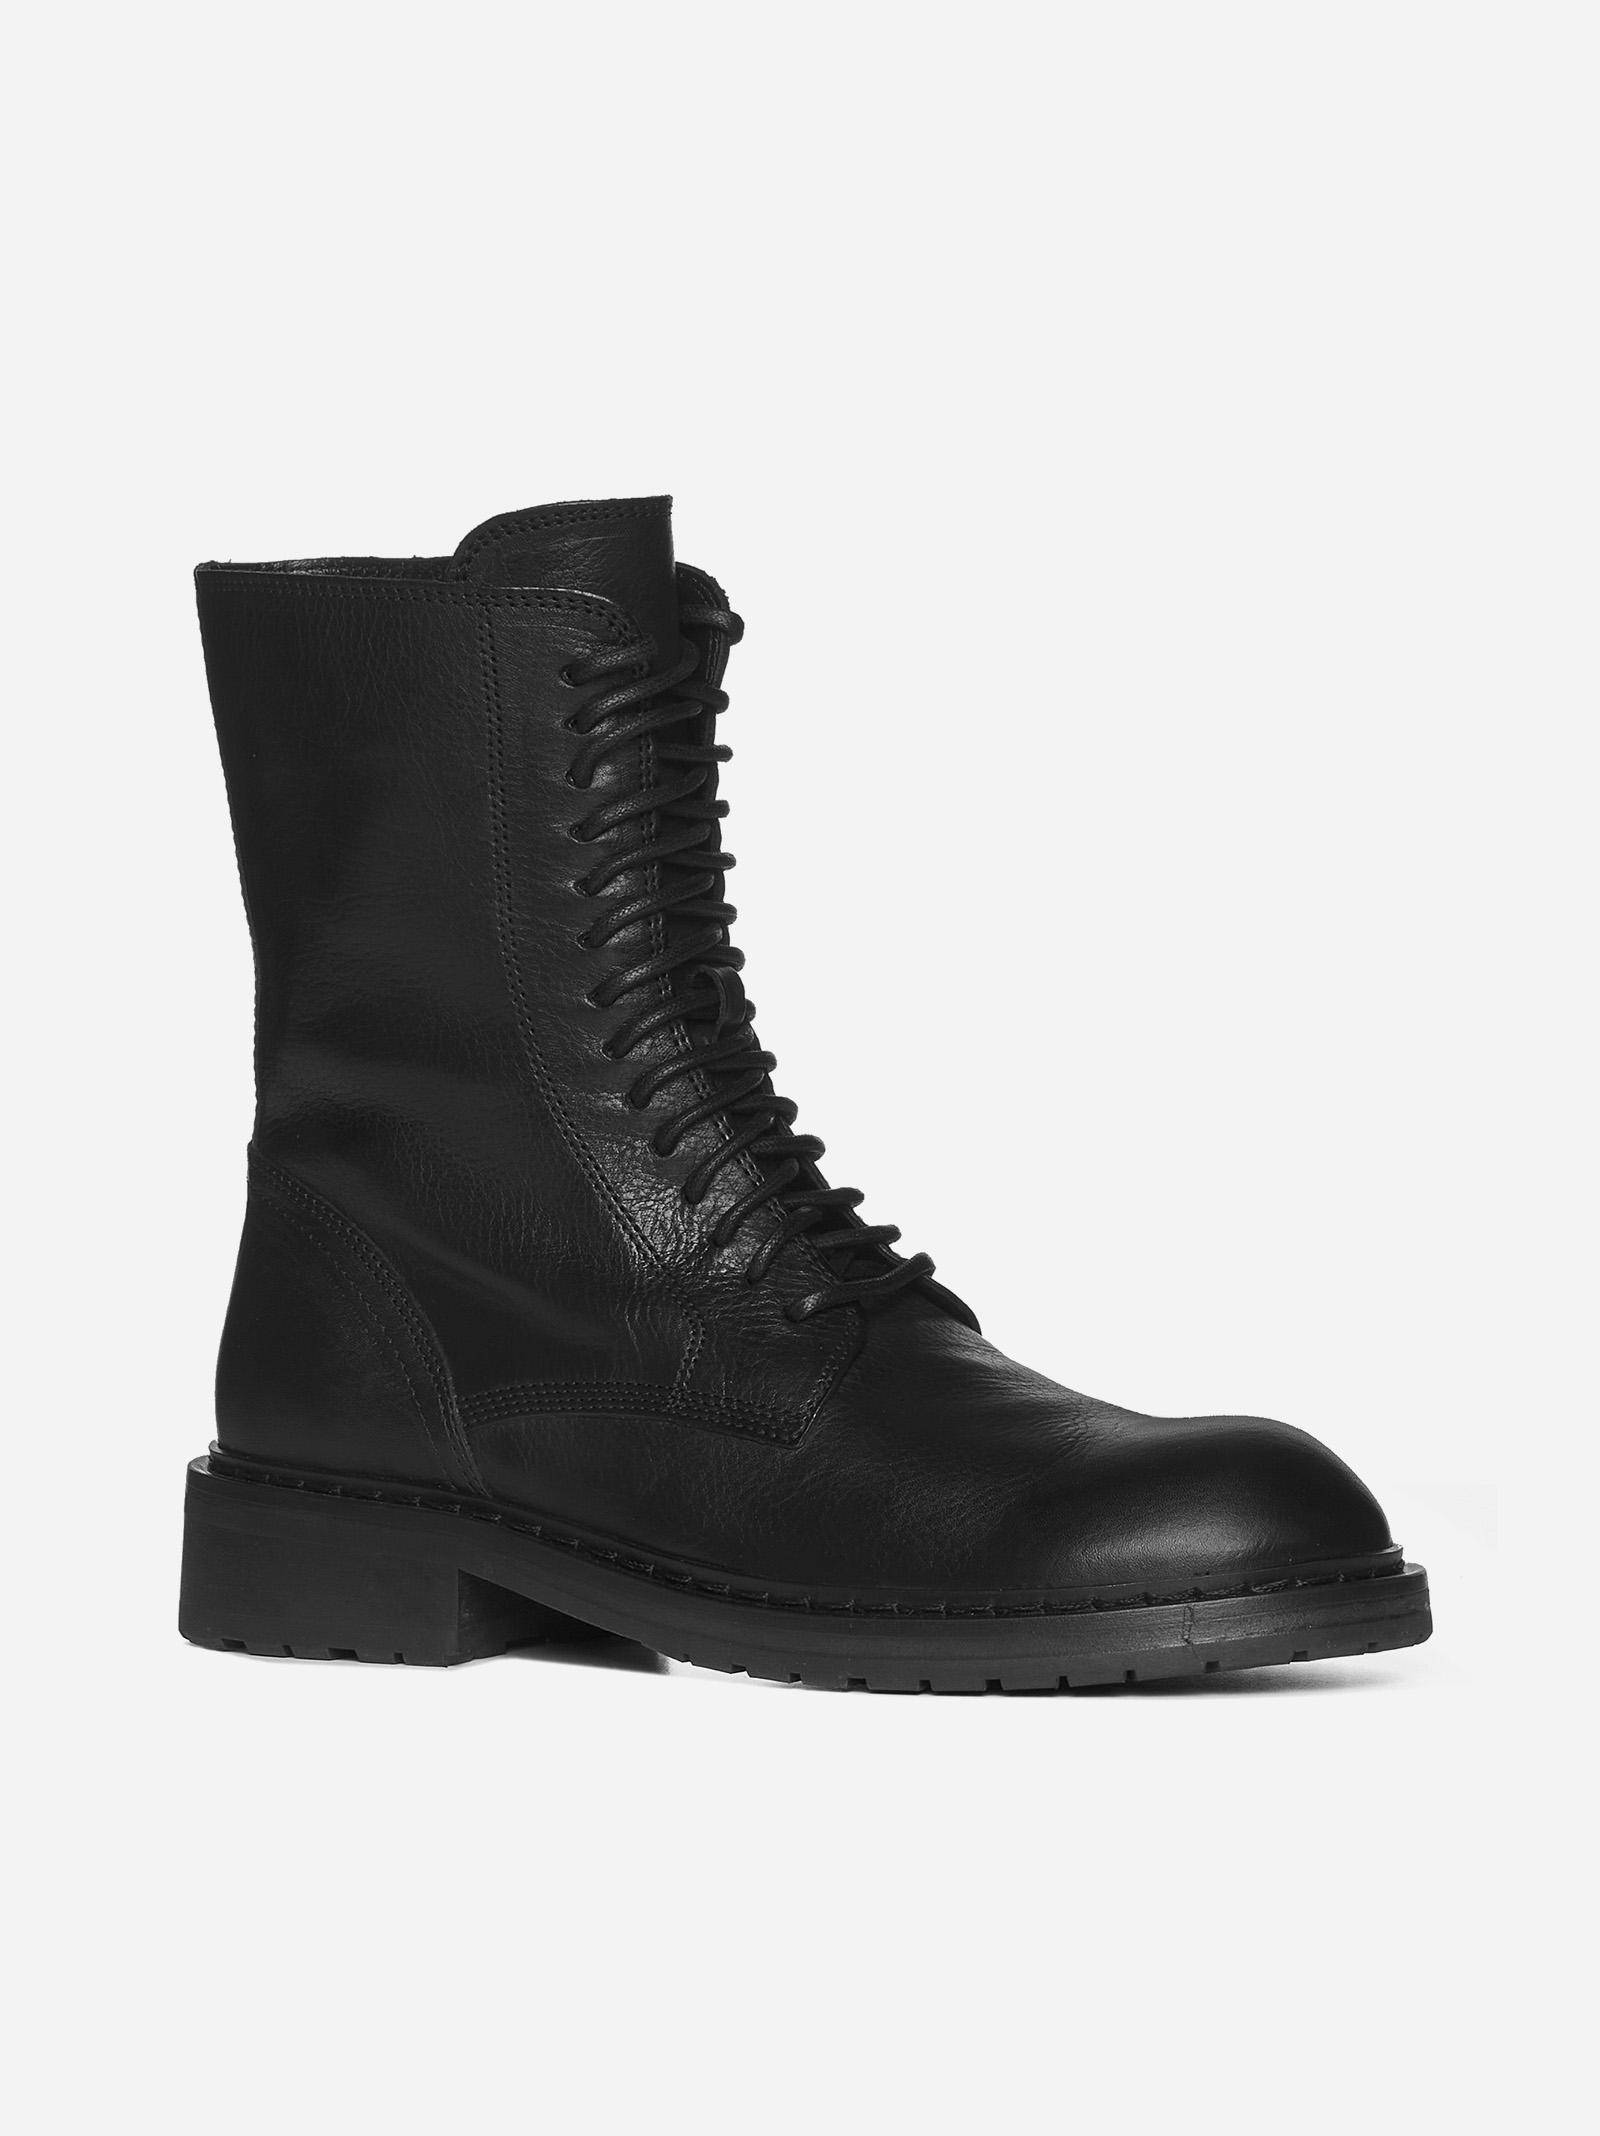 Ann Demeulemeester Santiago Leather Combat Boots in Black | Lyst